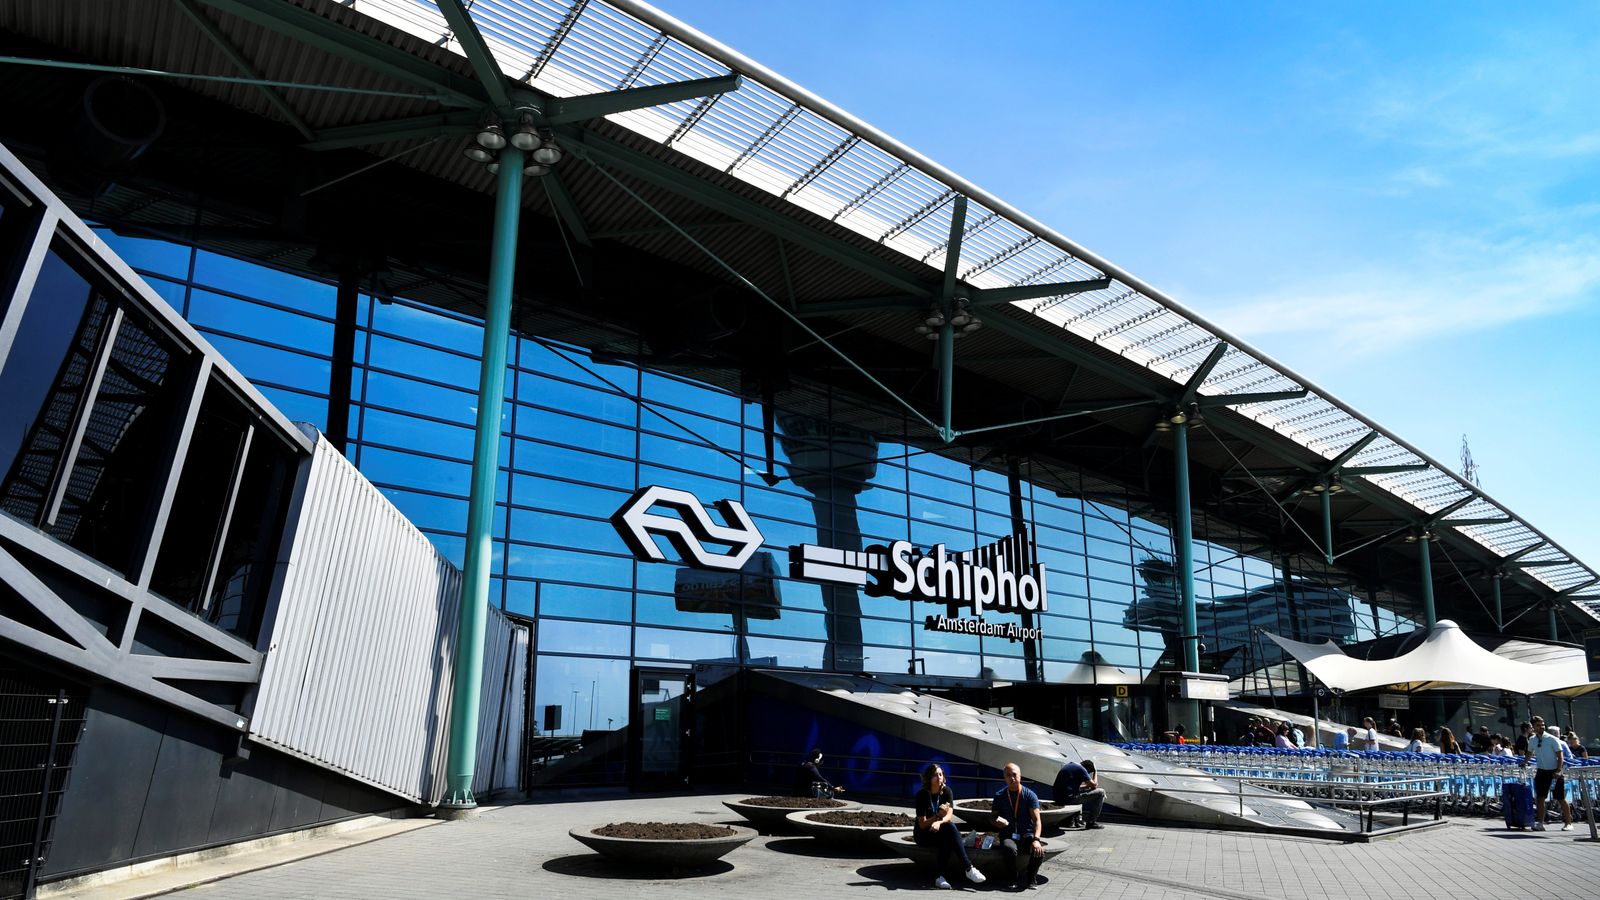 Person dies at Schiphol Airport in Amsterdam after becoming trapped in running aircraft engine